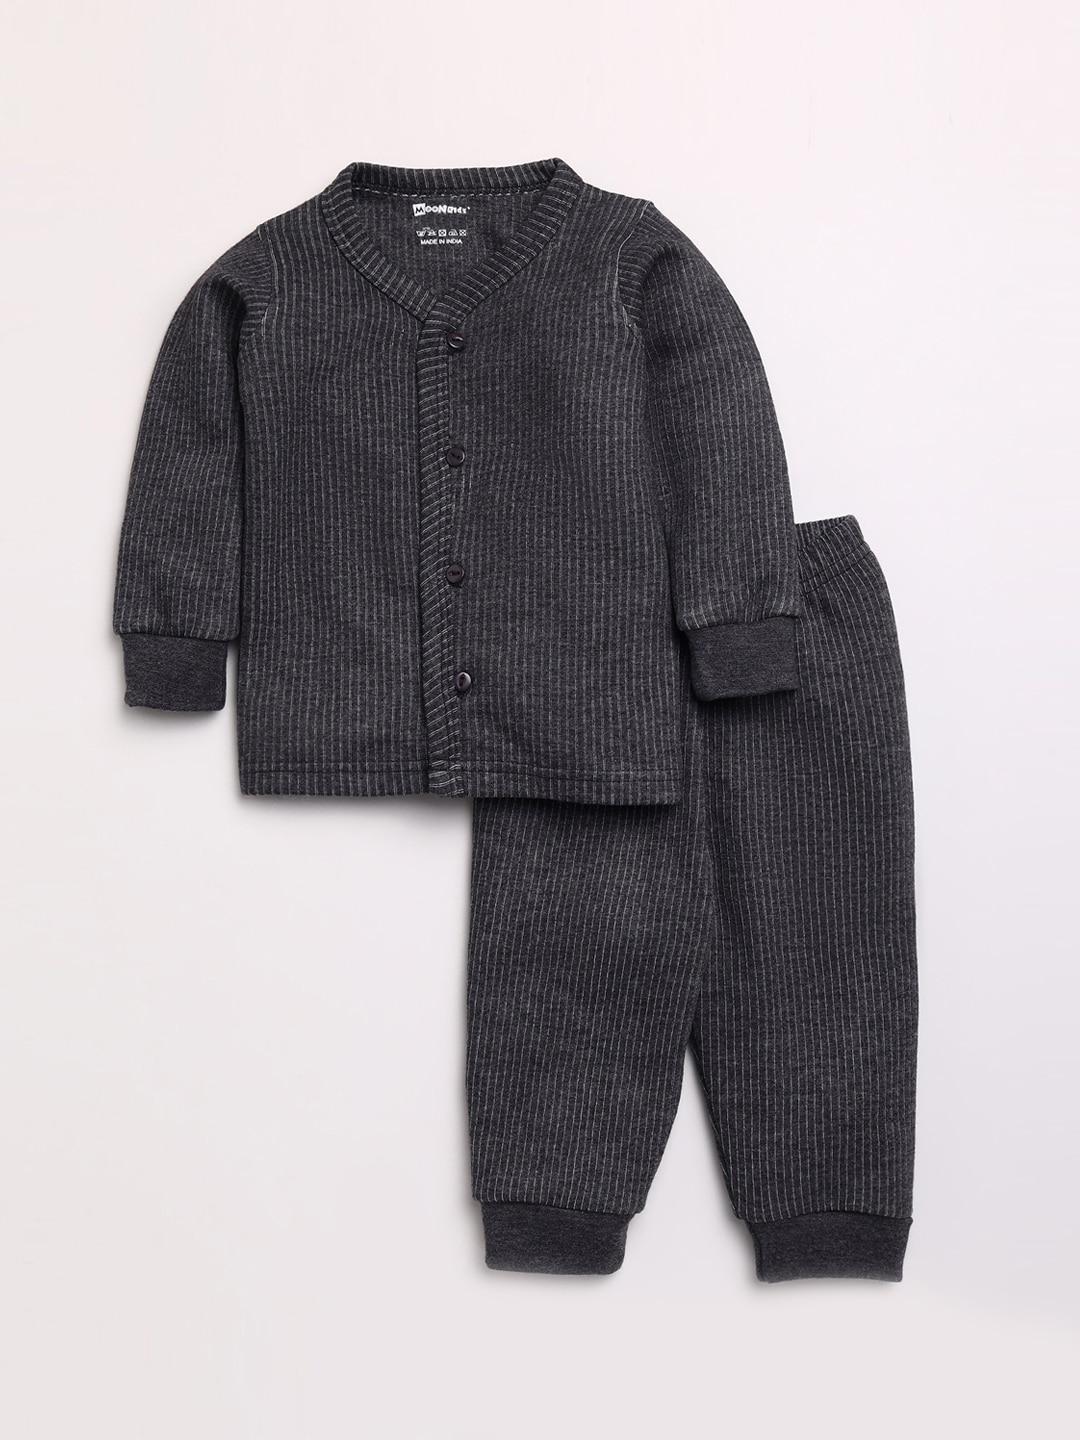 MooNKids Boys Grey Solid Thermal Set